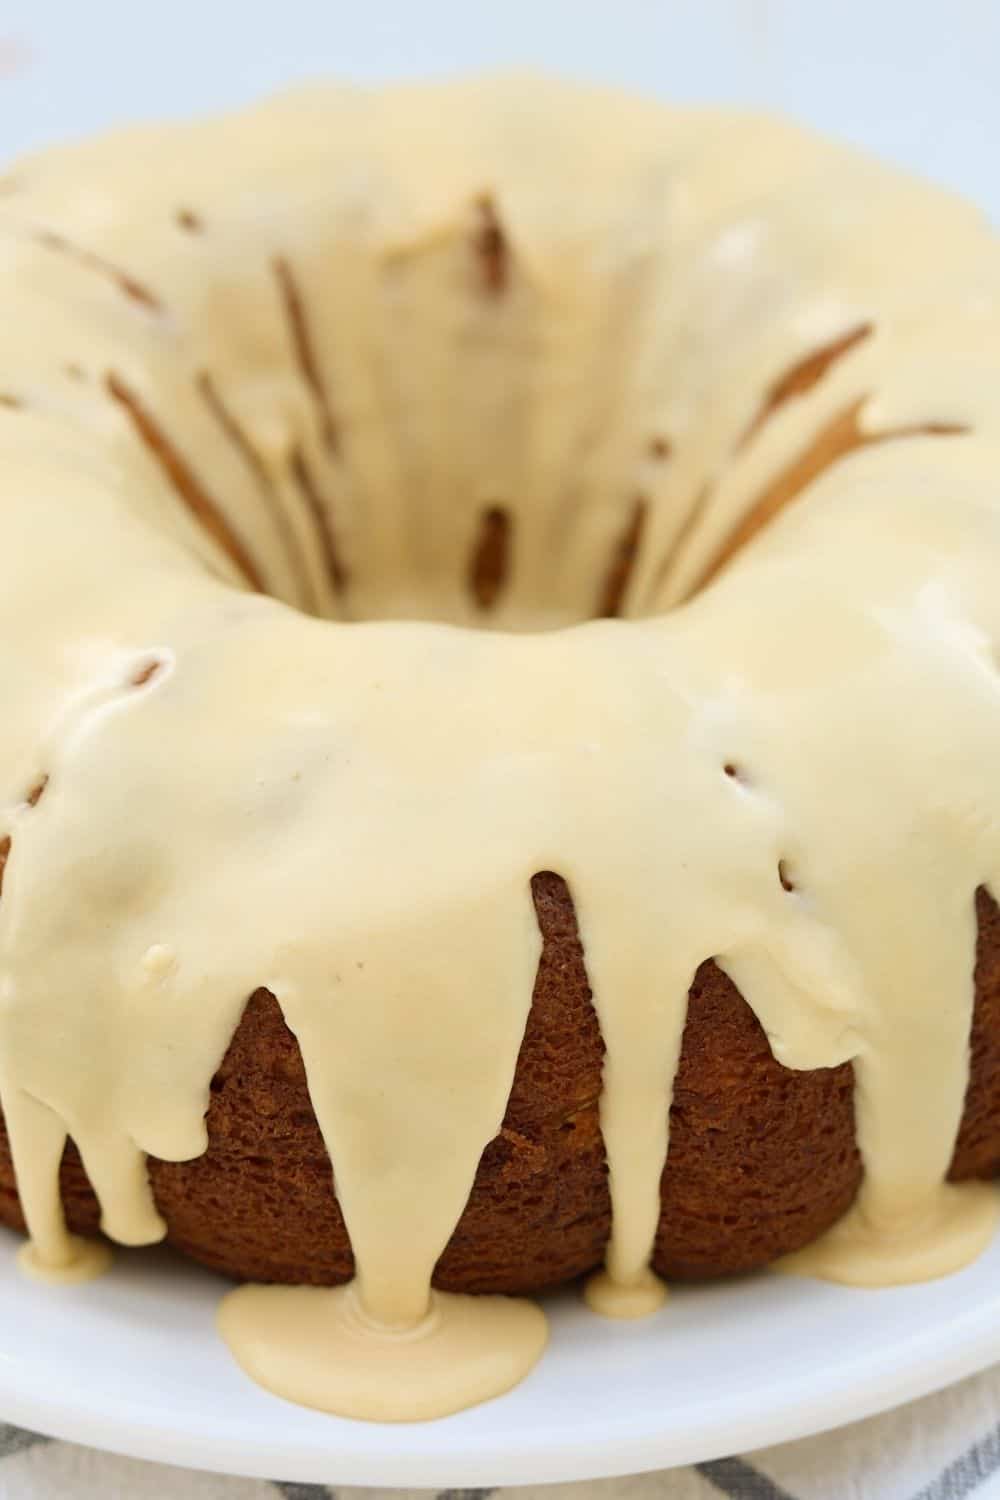 close-up view of the brown sugar caramel icing drizzled over the pear cake.